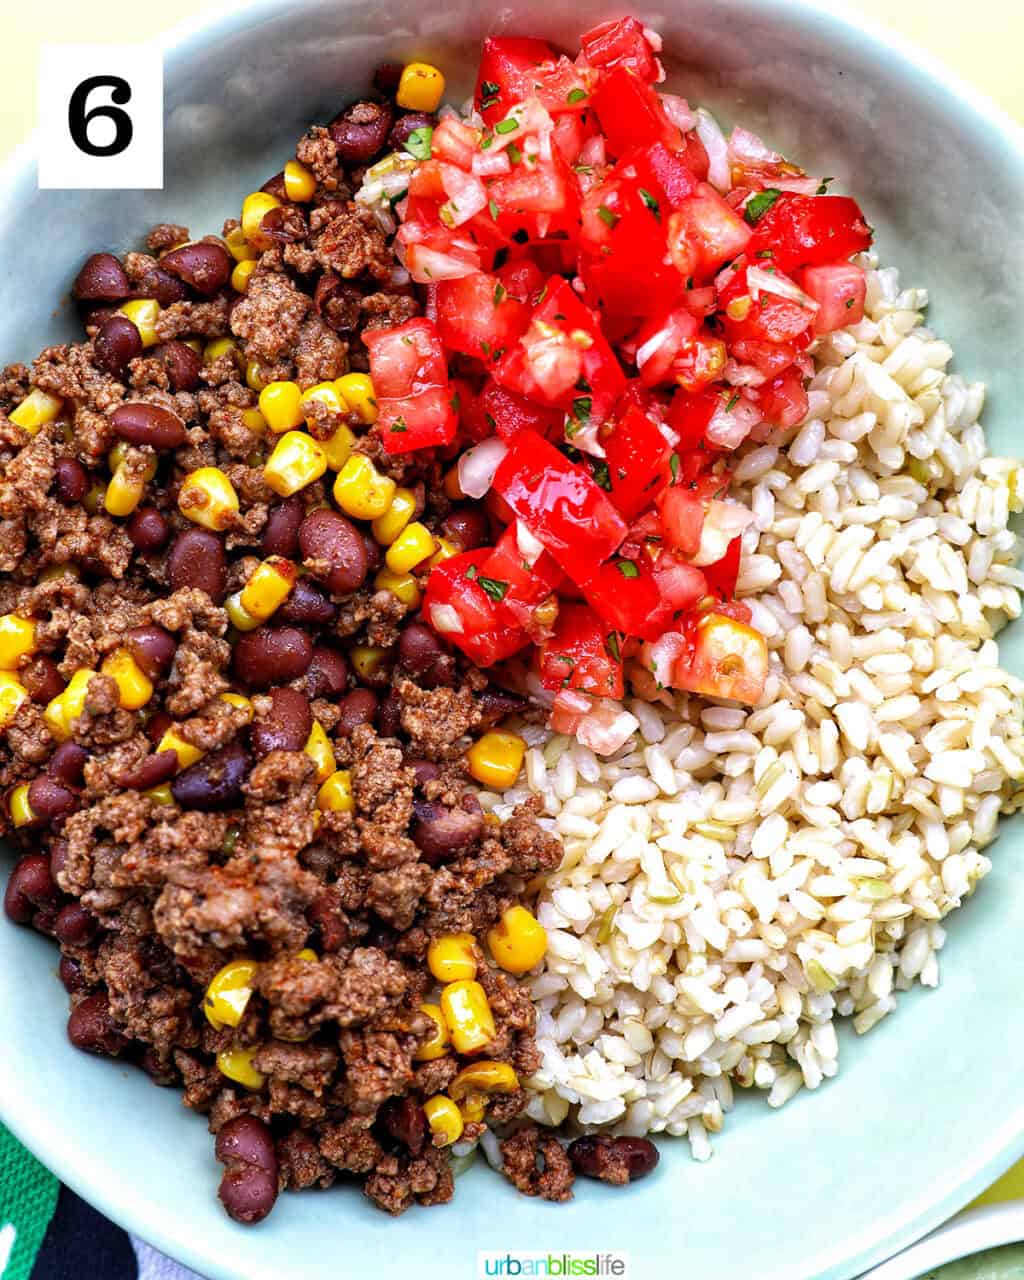 taco bowl of brown rice, beef, beans, corn, tomatoes.